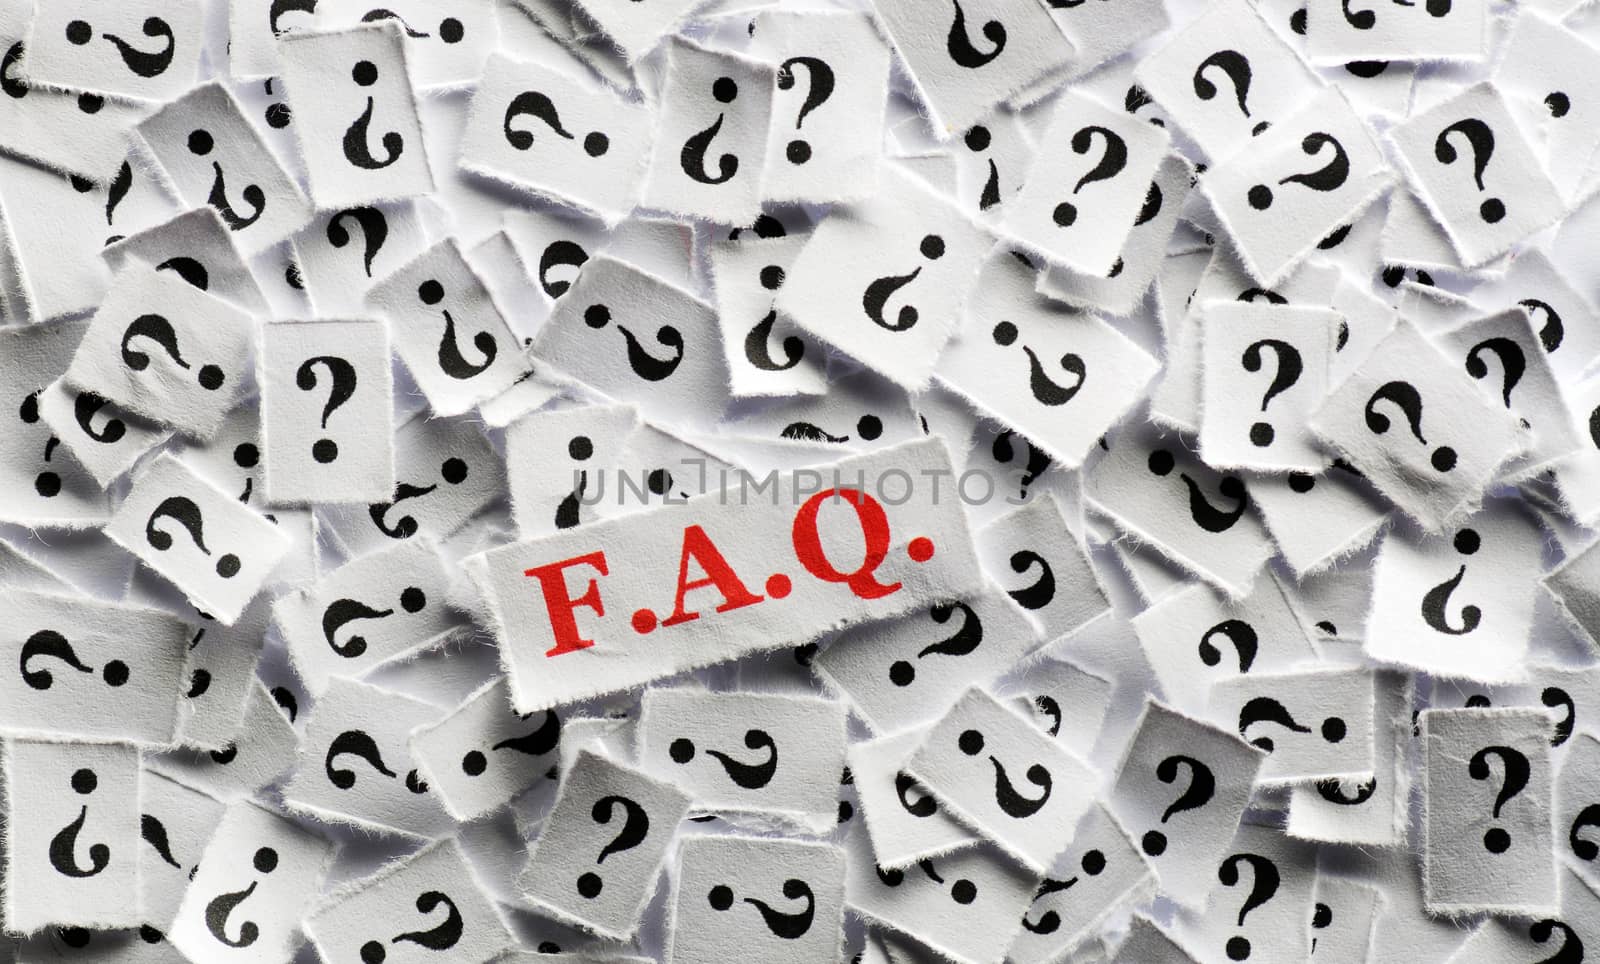  FAQ  question marks on white papers -hard light